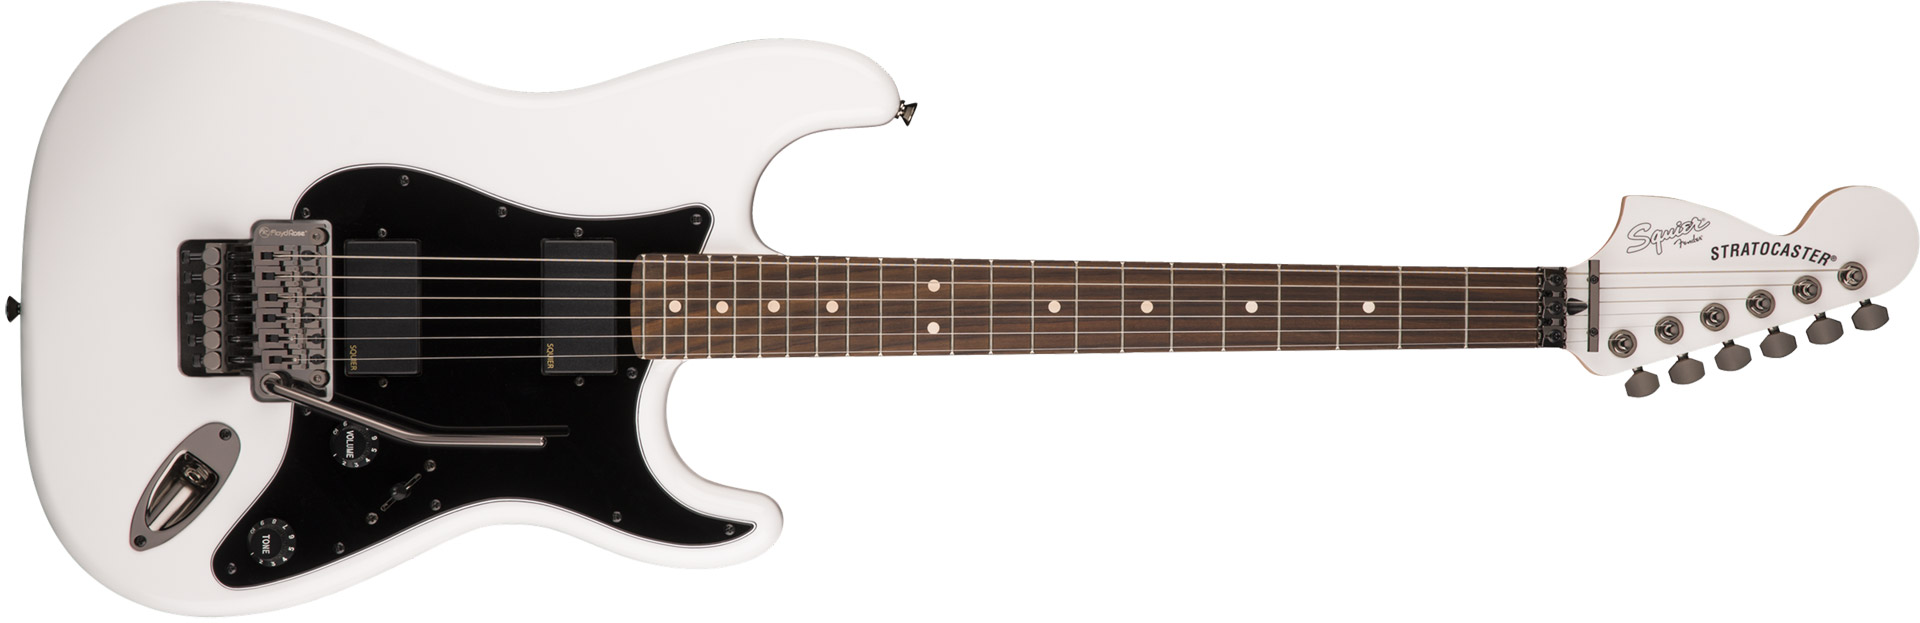 GUITARRA FENDER SQUIER CONTEMPORARY STRATOCASTER FLOYD ROSE HH LR - 037-0327-505 - OLYMPIC WHITE